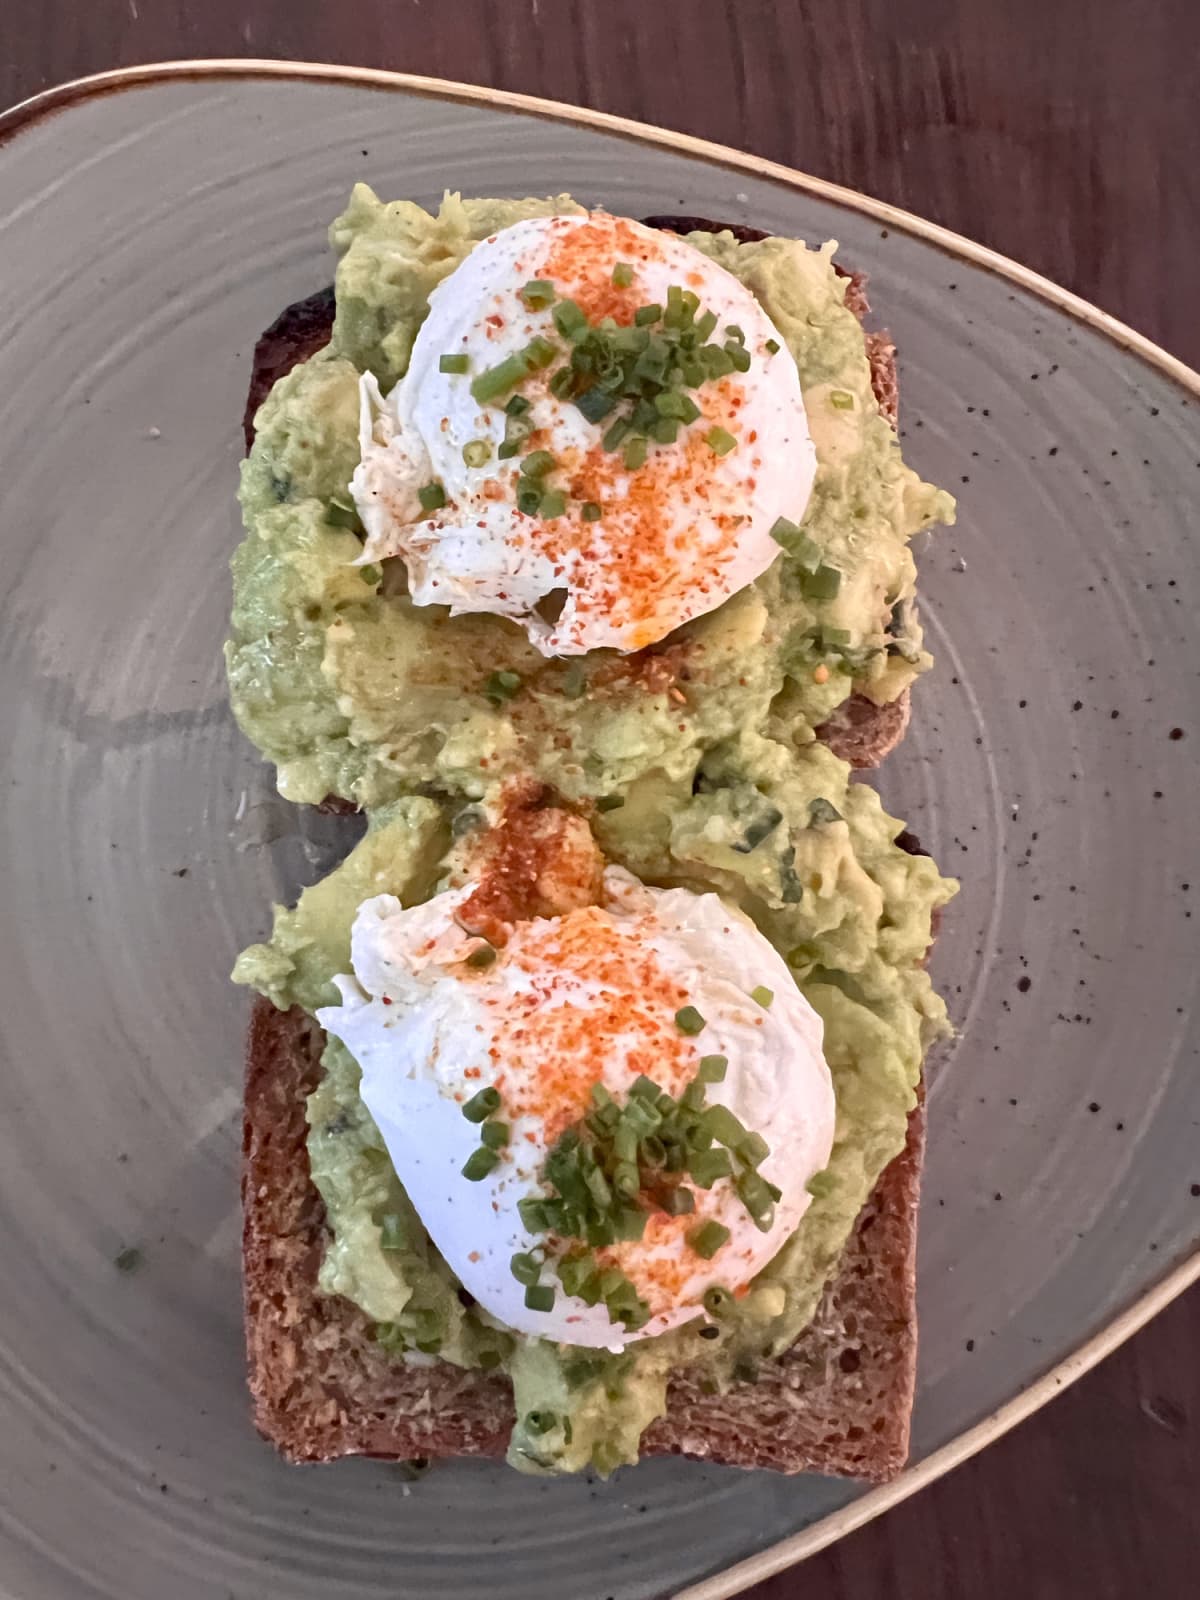 Tasty poached eggs with chives on top of smashed avocado on Nordic style bread